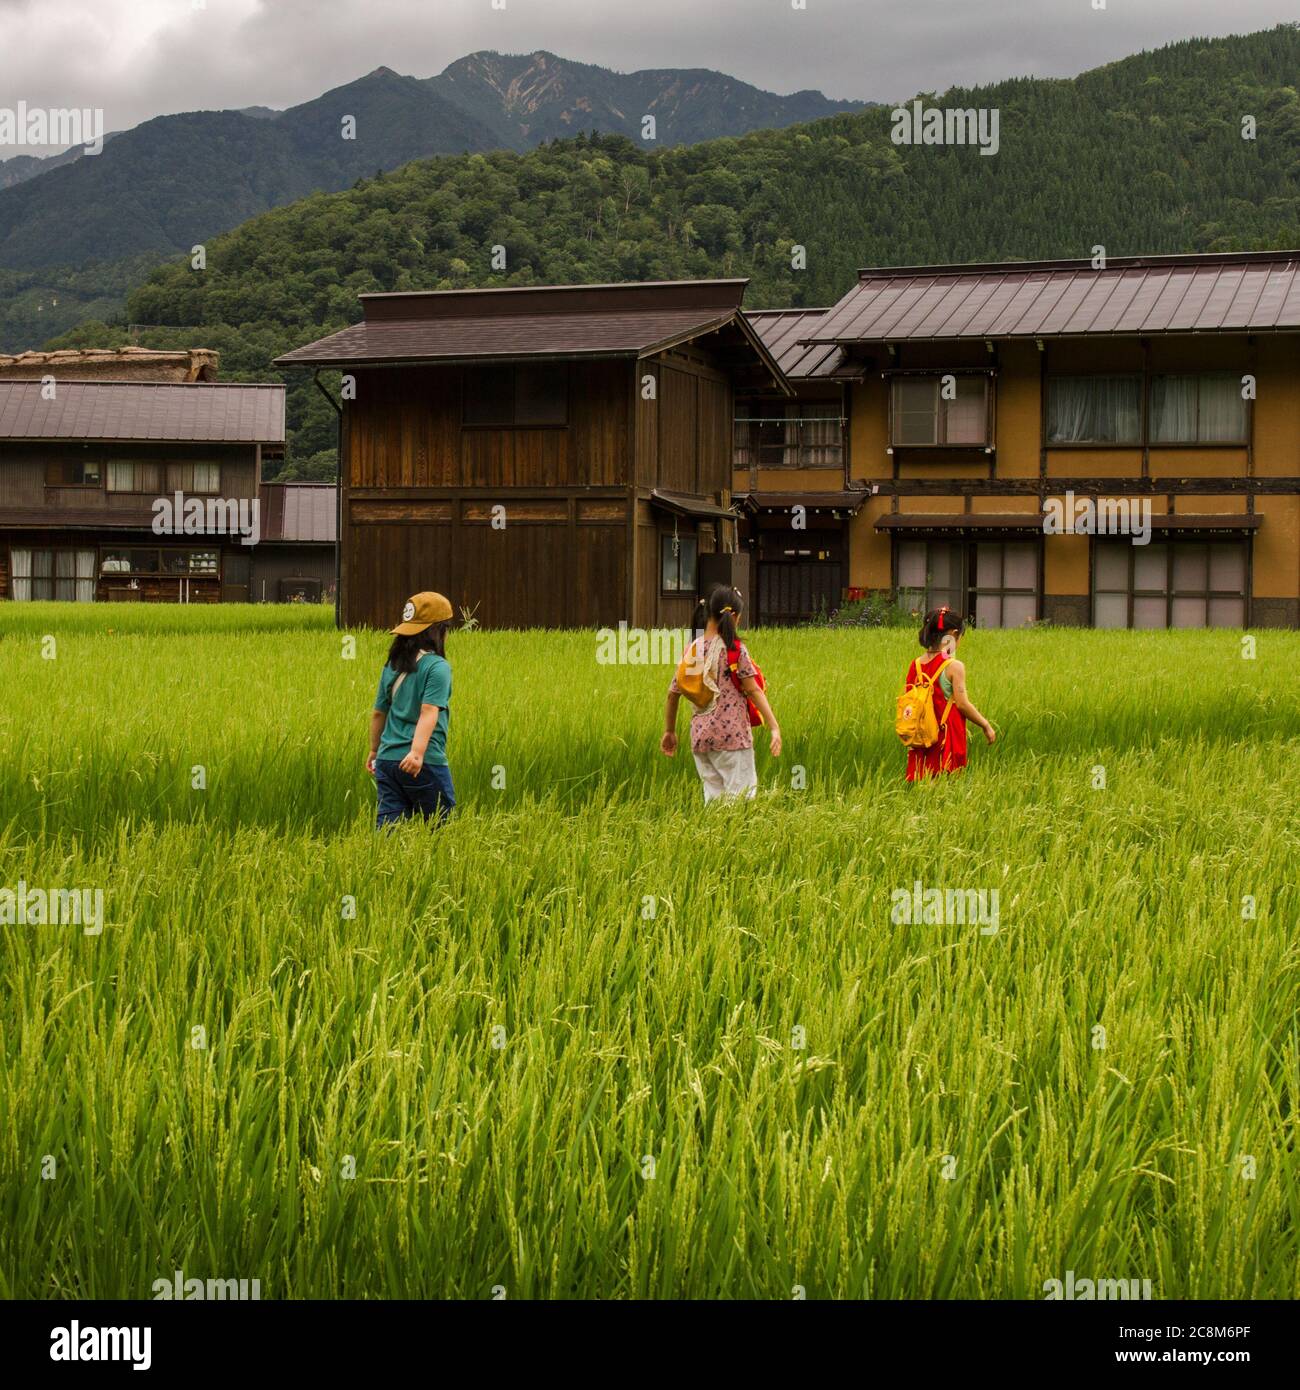 August 2019- Shirakawa-go, Japan. Kids in the midle of rice field. Shirakawa-go is an UNESCO heritage site with historical houses constructed in wood. Stock Photo